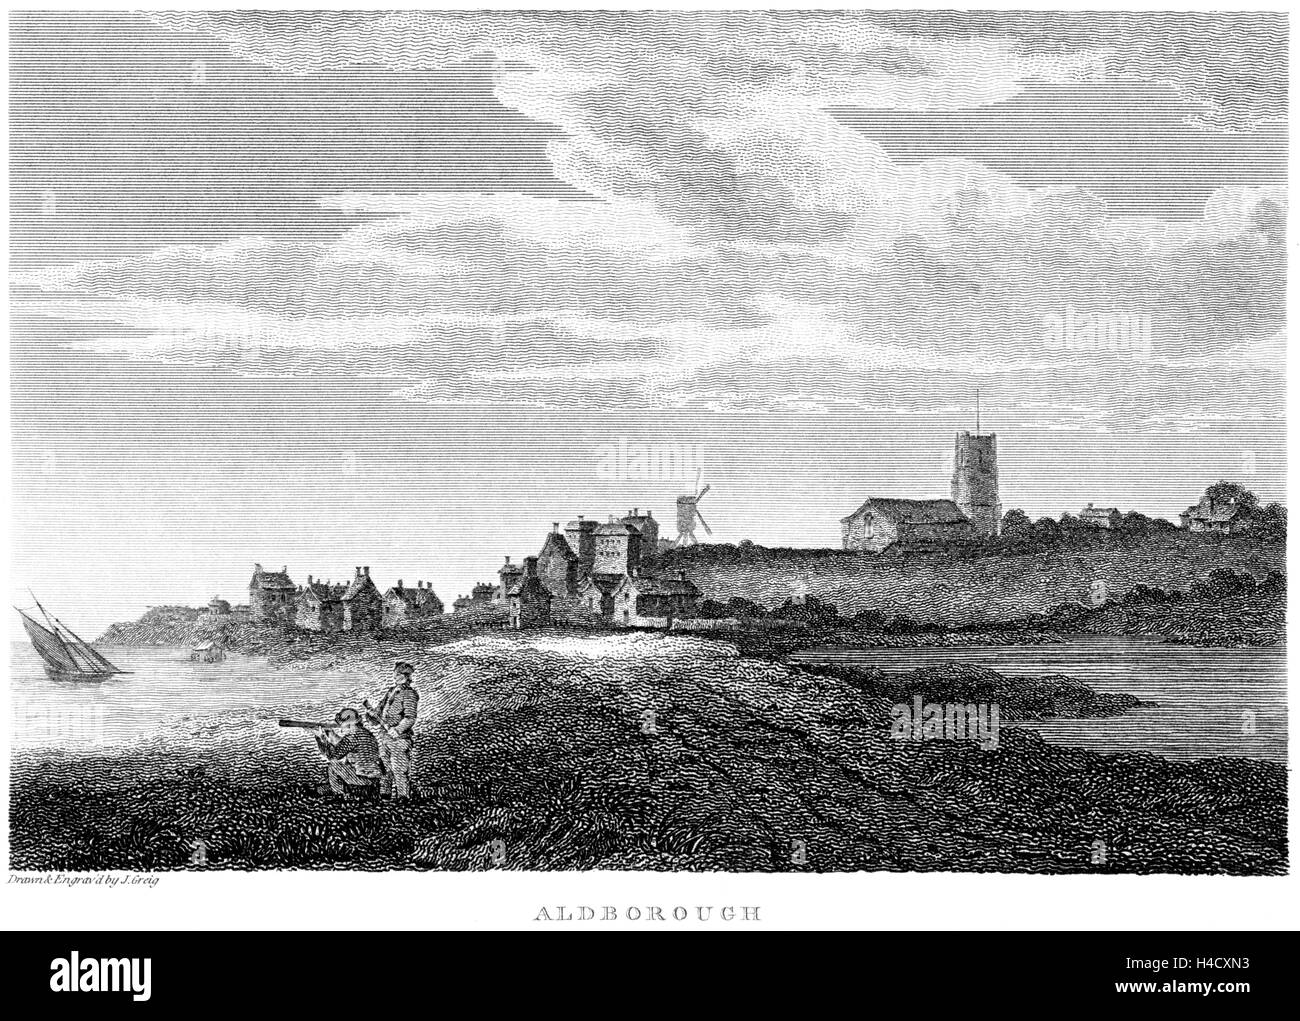 An engraving of Aldborough (Aldeburgh), Suffolk scanned at high resolution from a book printed in 1812. Stock Photo